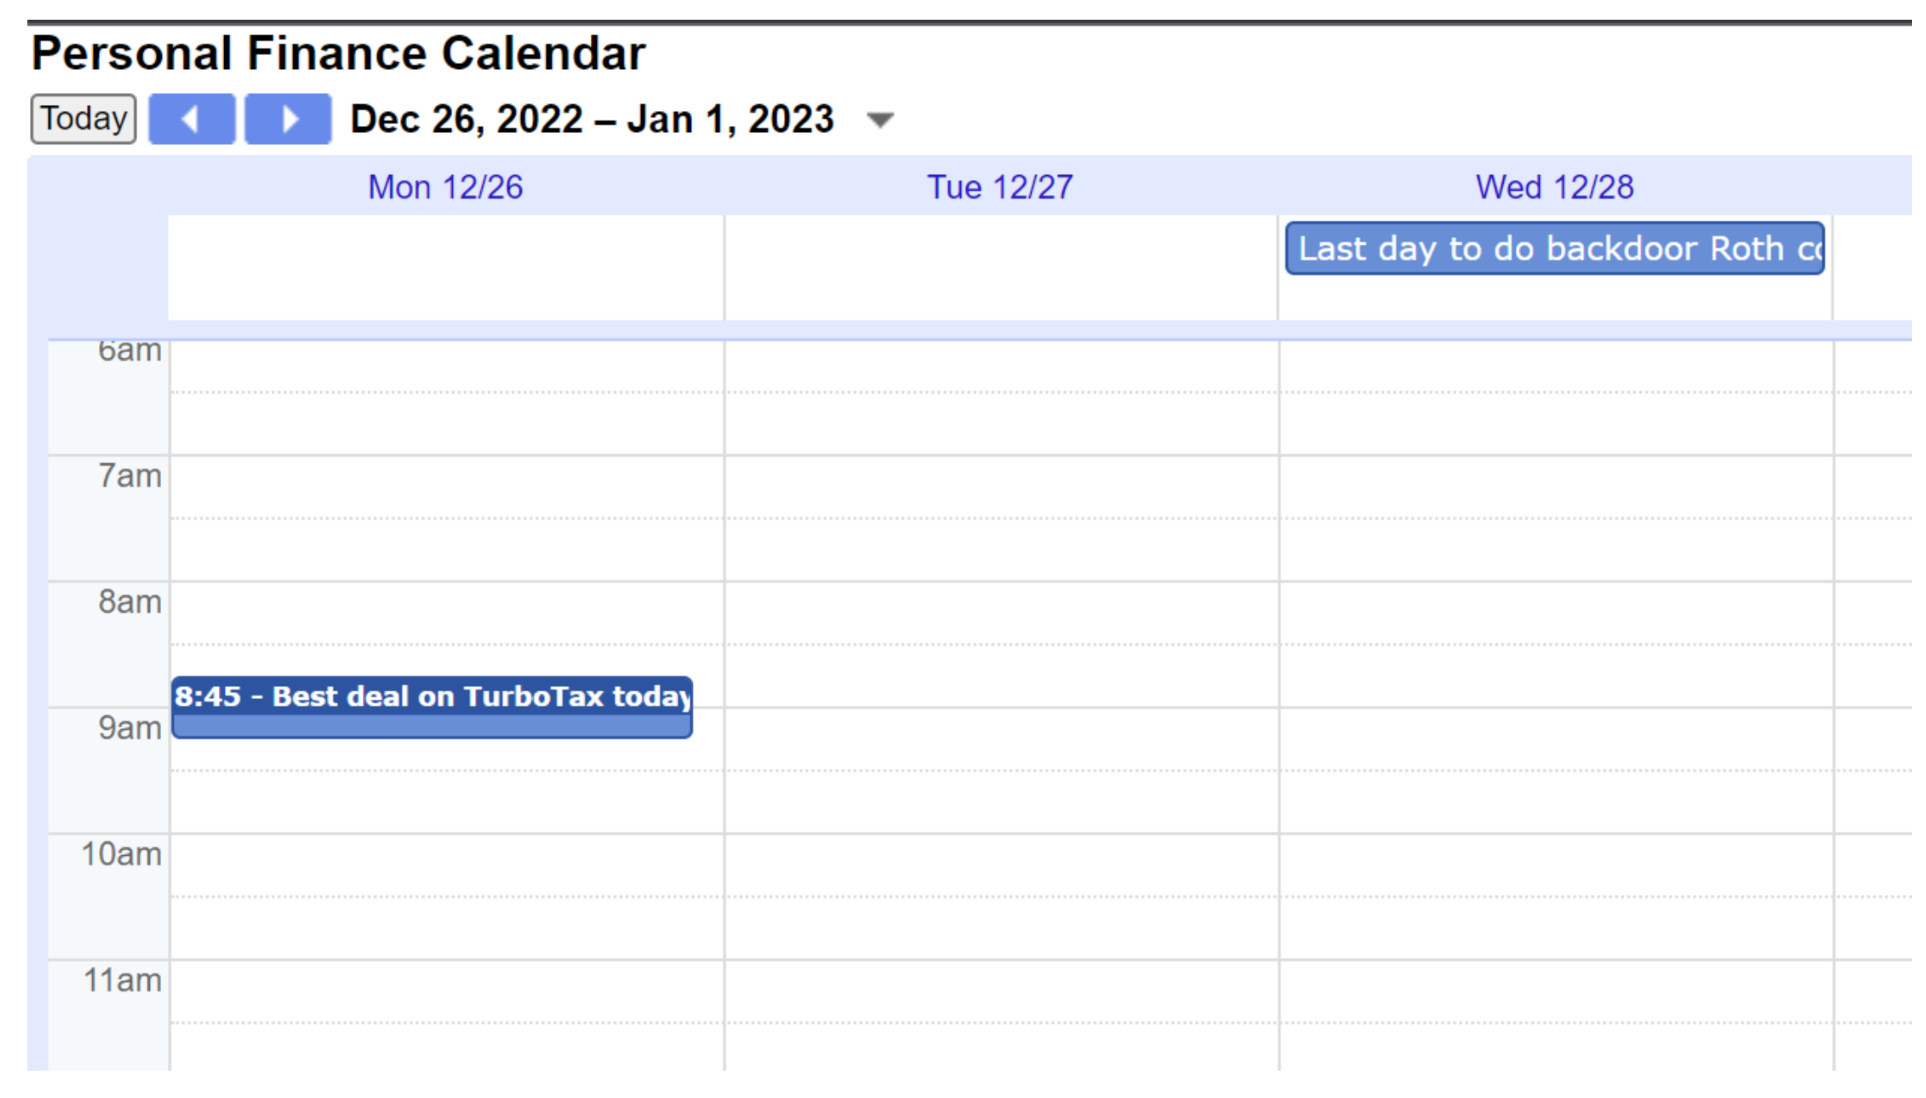 The Personal Finance Calendar is a Google Calendar that you can subscribe to.